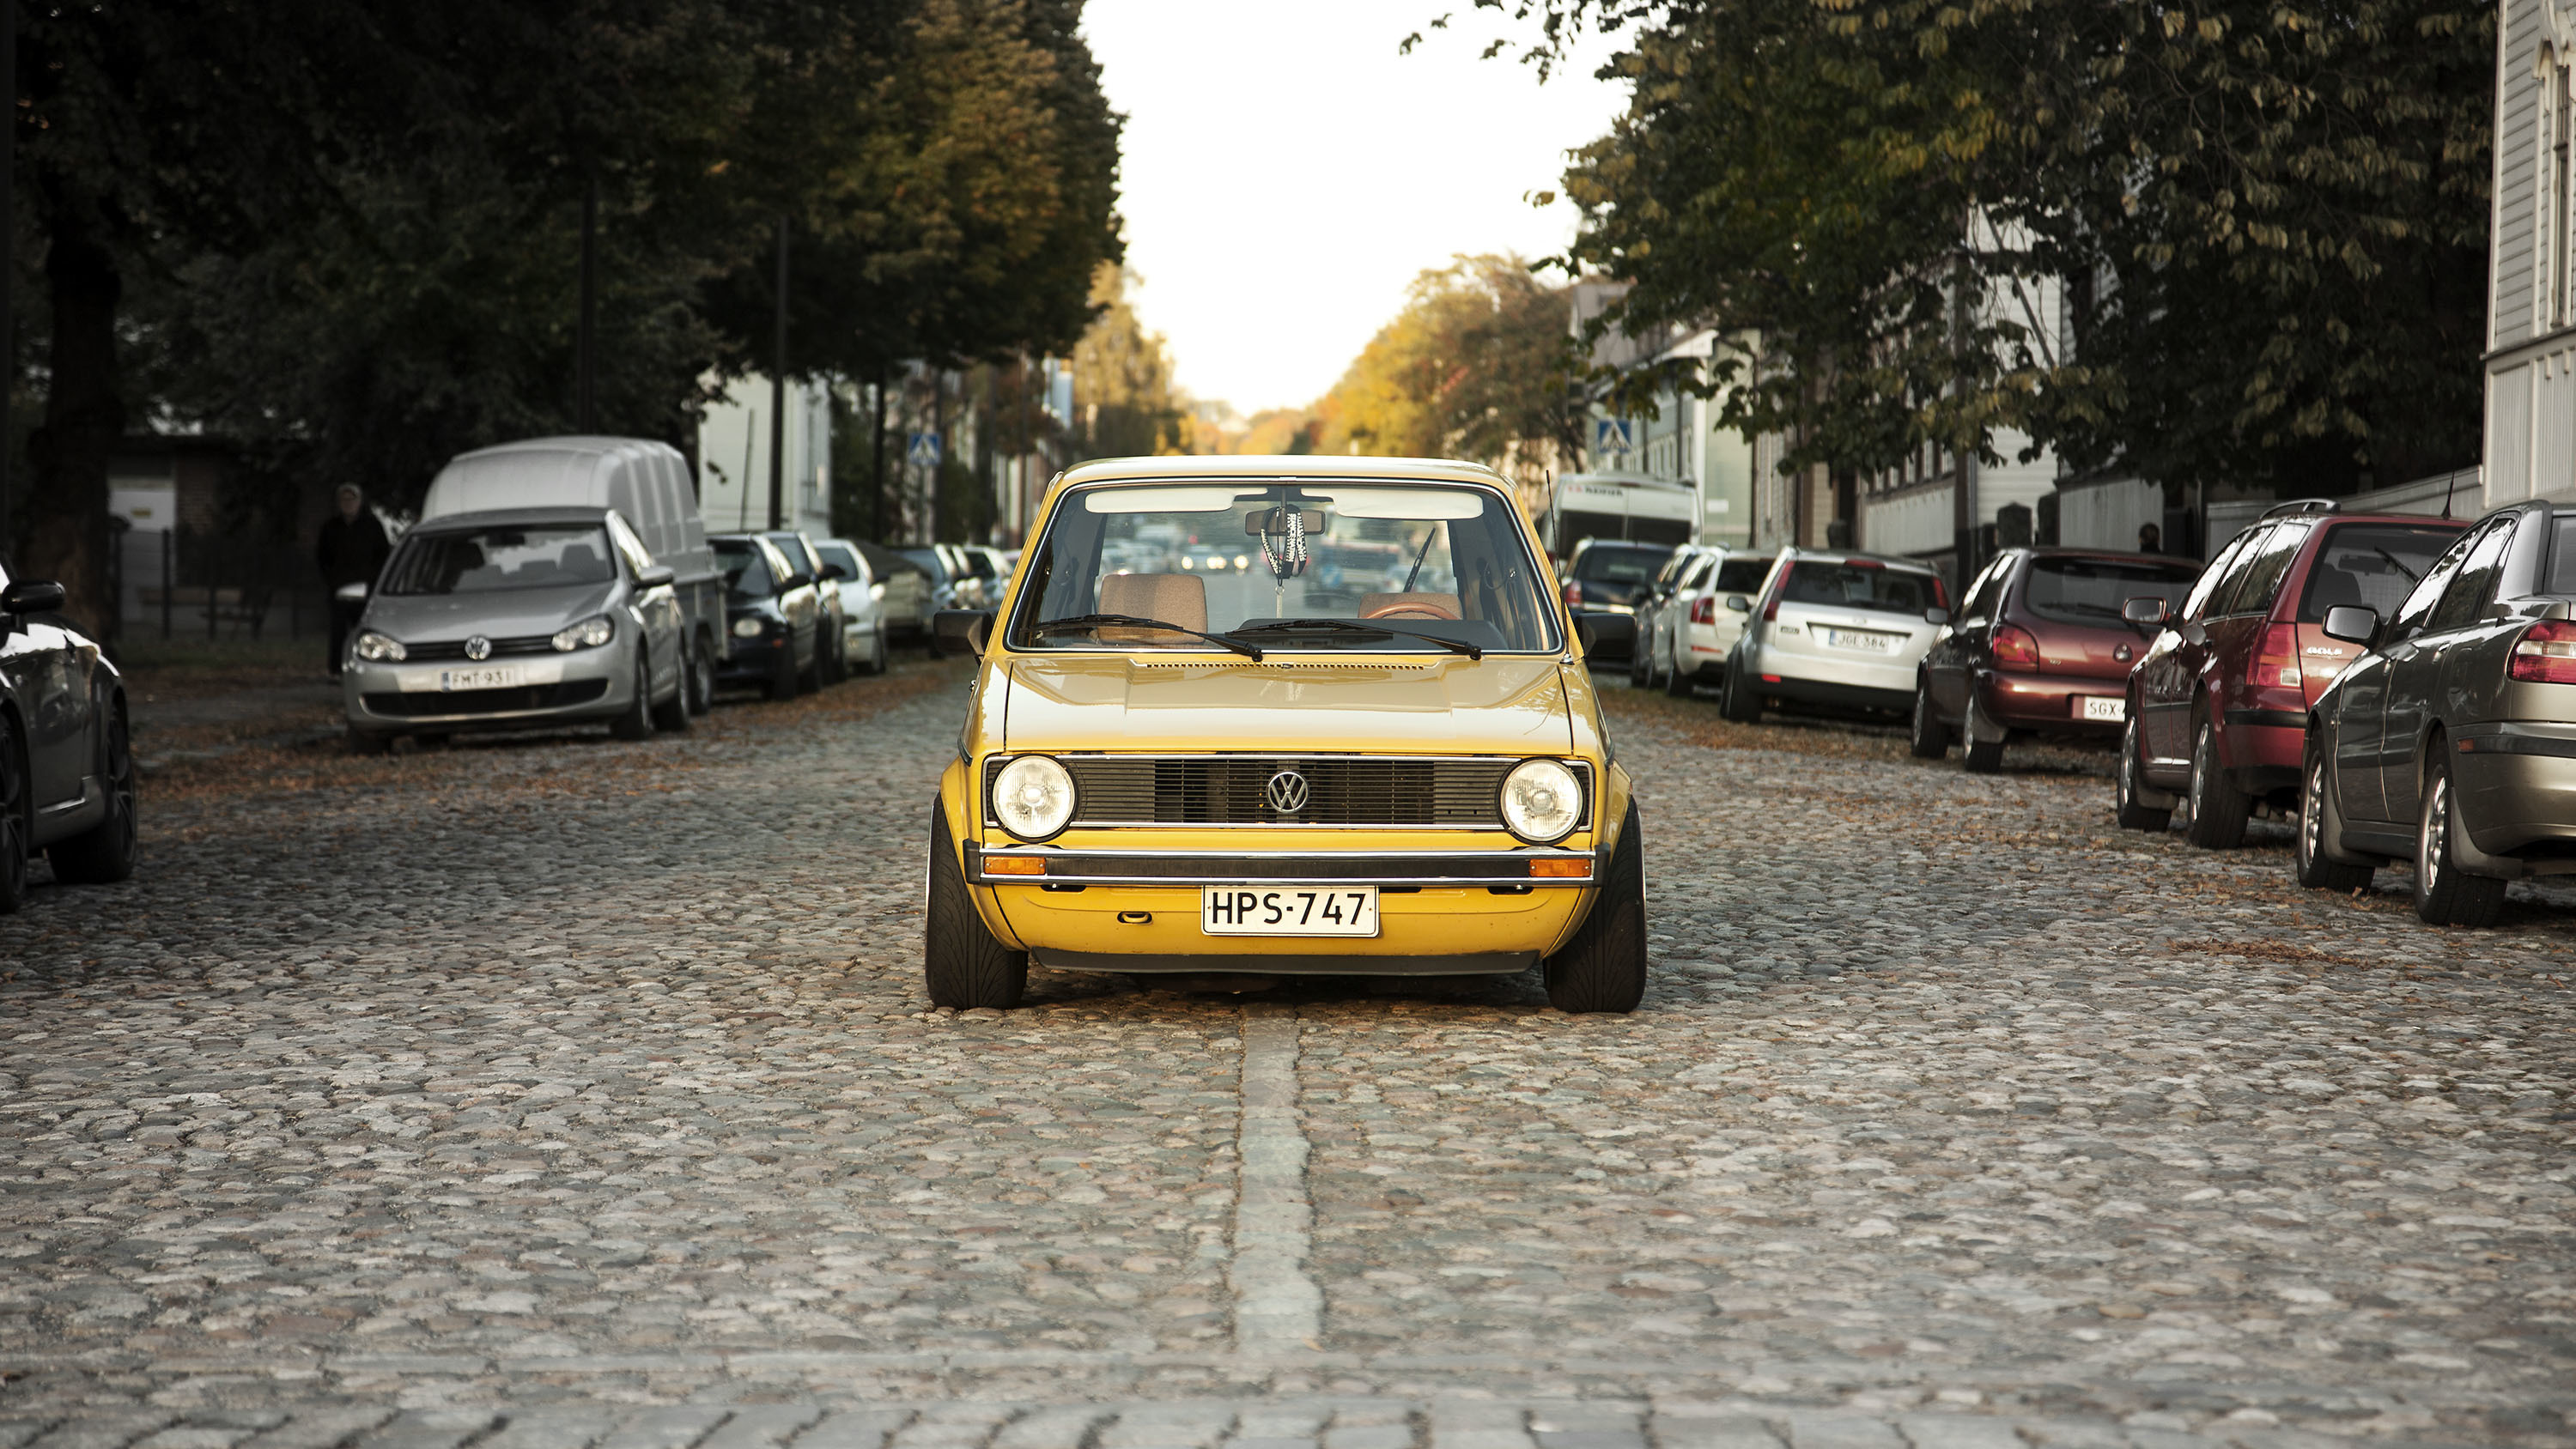 volkswagen, front view, cars, golf, yellow, mk1 Full HD